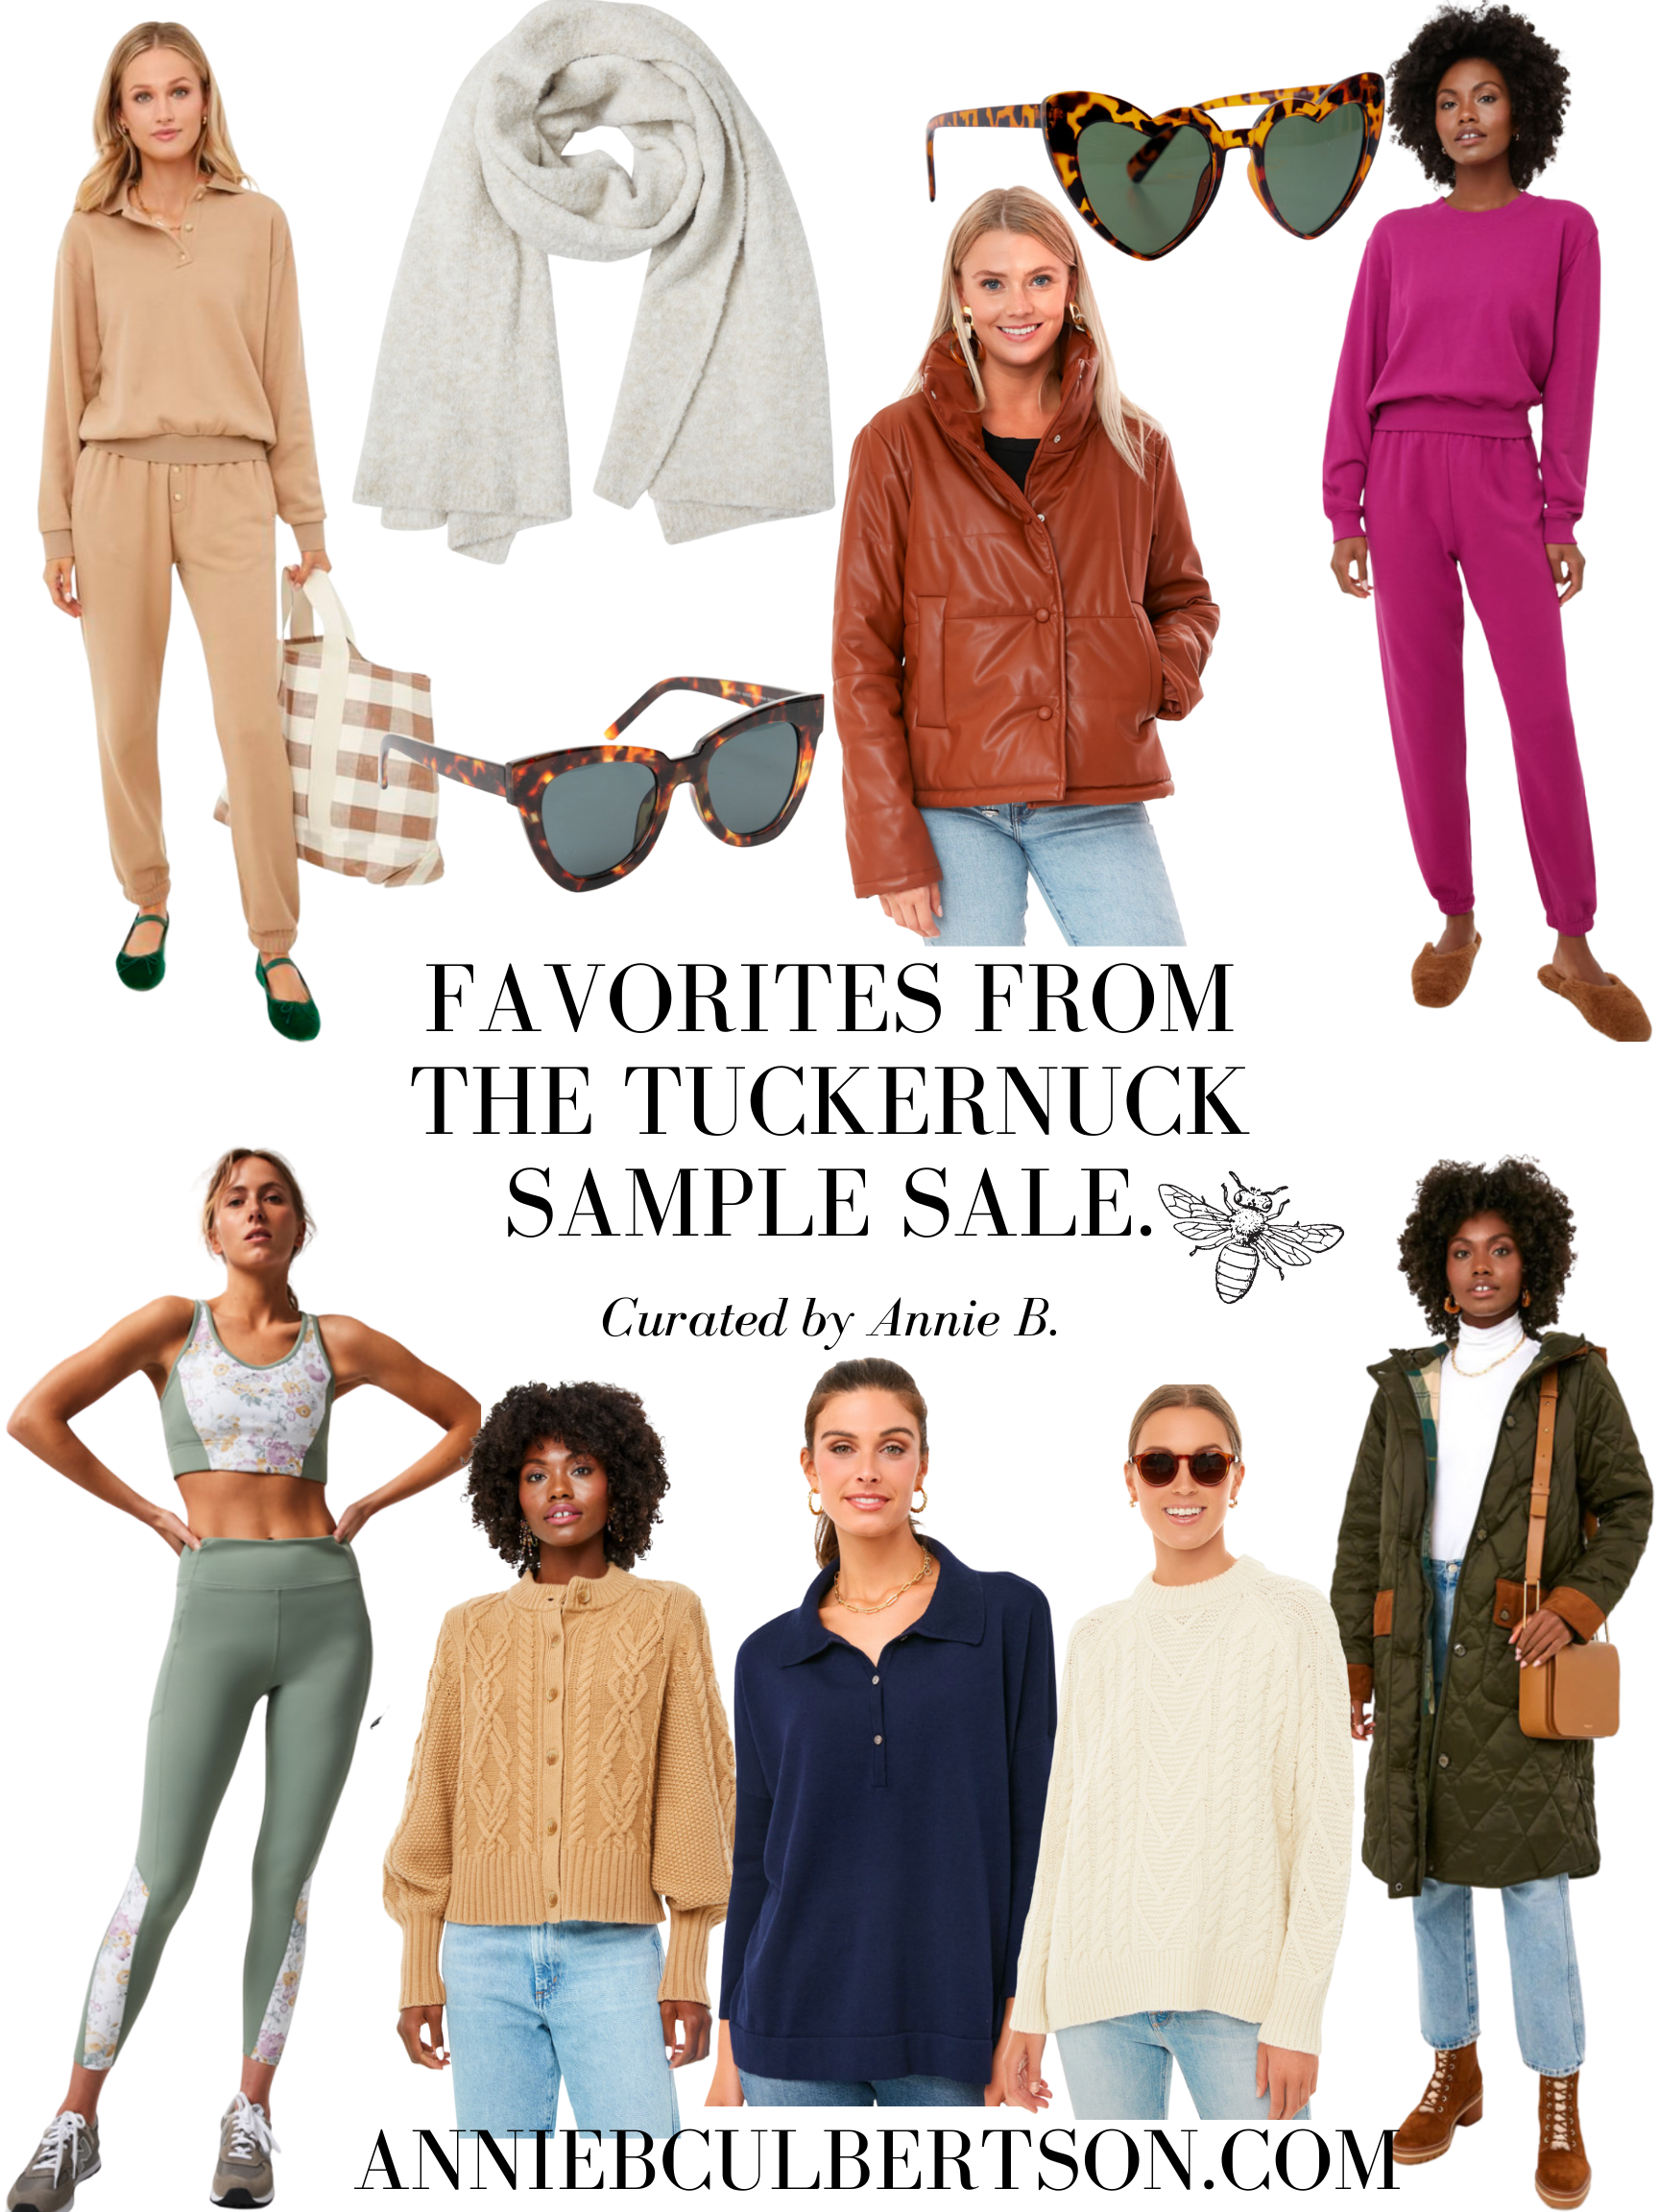 Favorites from the Tuckernuck Sample Sale